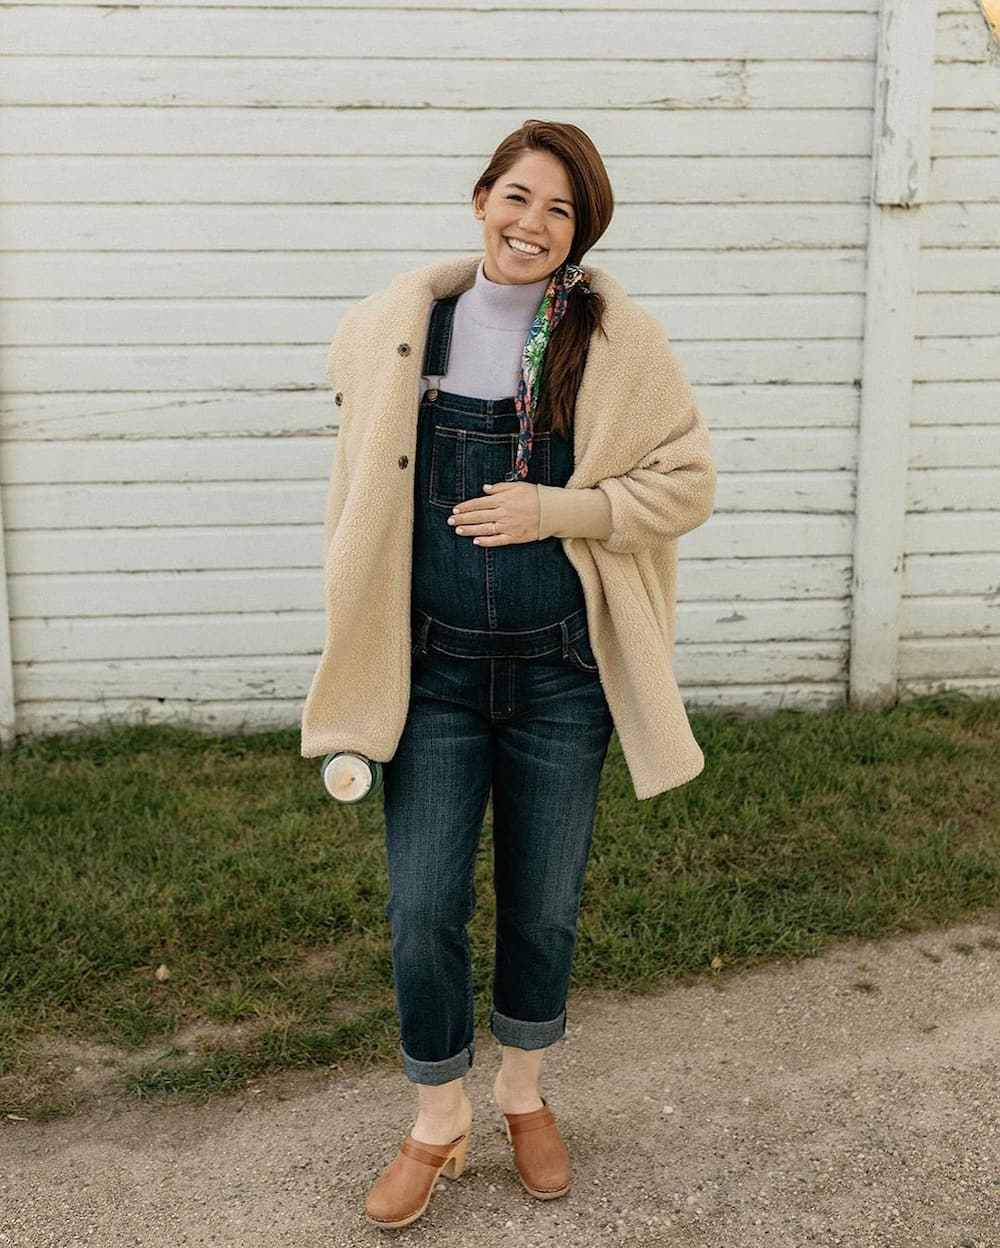 Molly Yeh's net worth